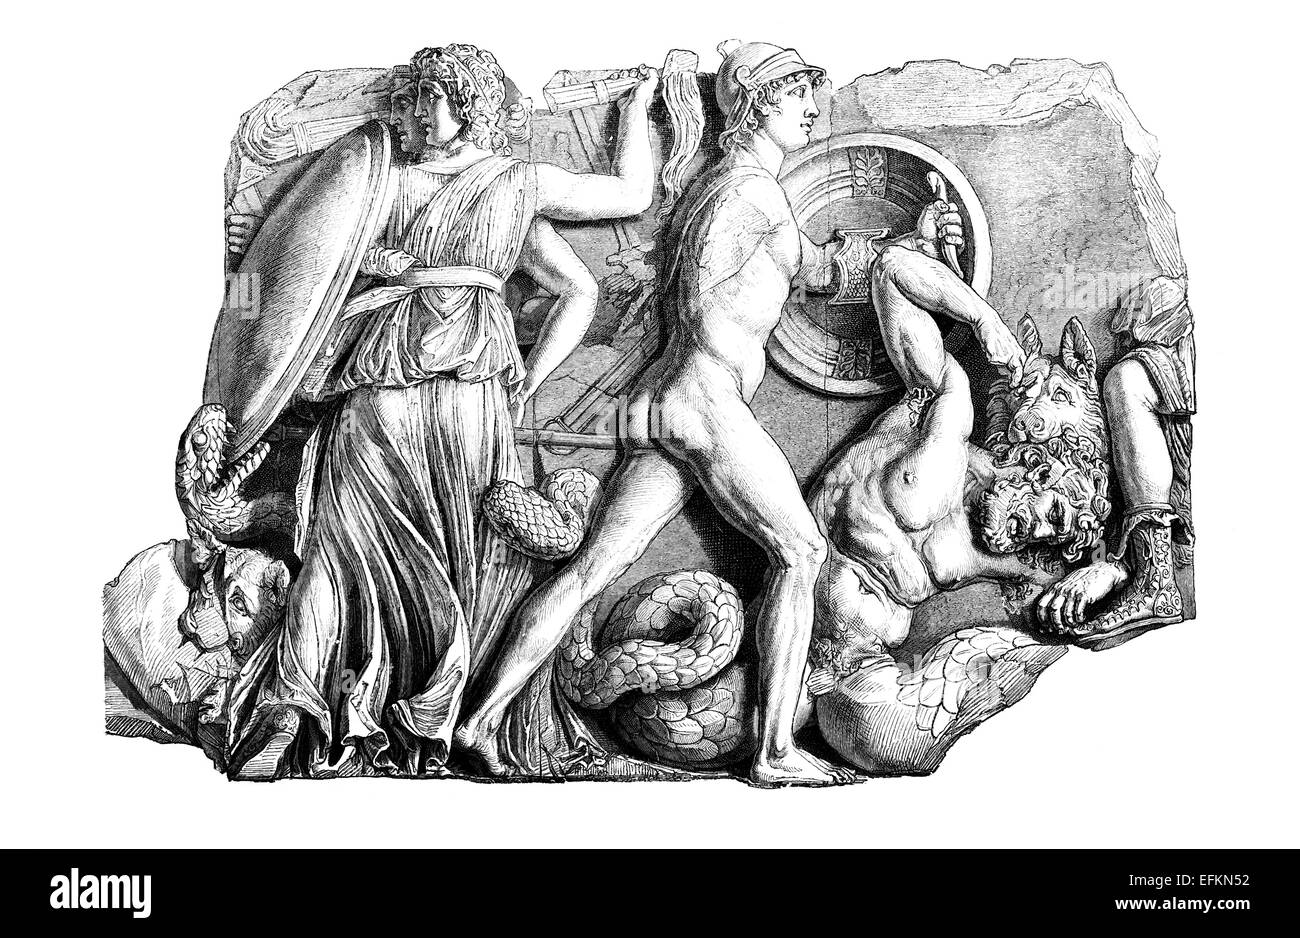 Victorian engraving of a frieze from the Pergamon Altar. Digitally restored image from a mid-19th century Encyclopaedia. Stock Photo